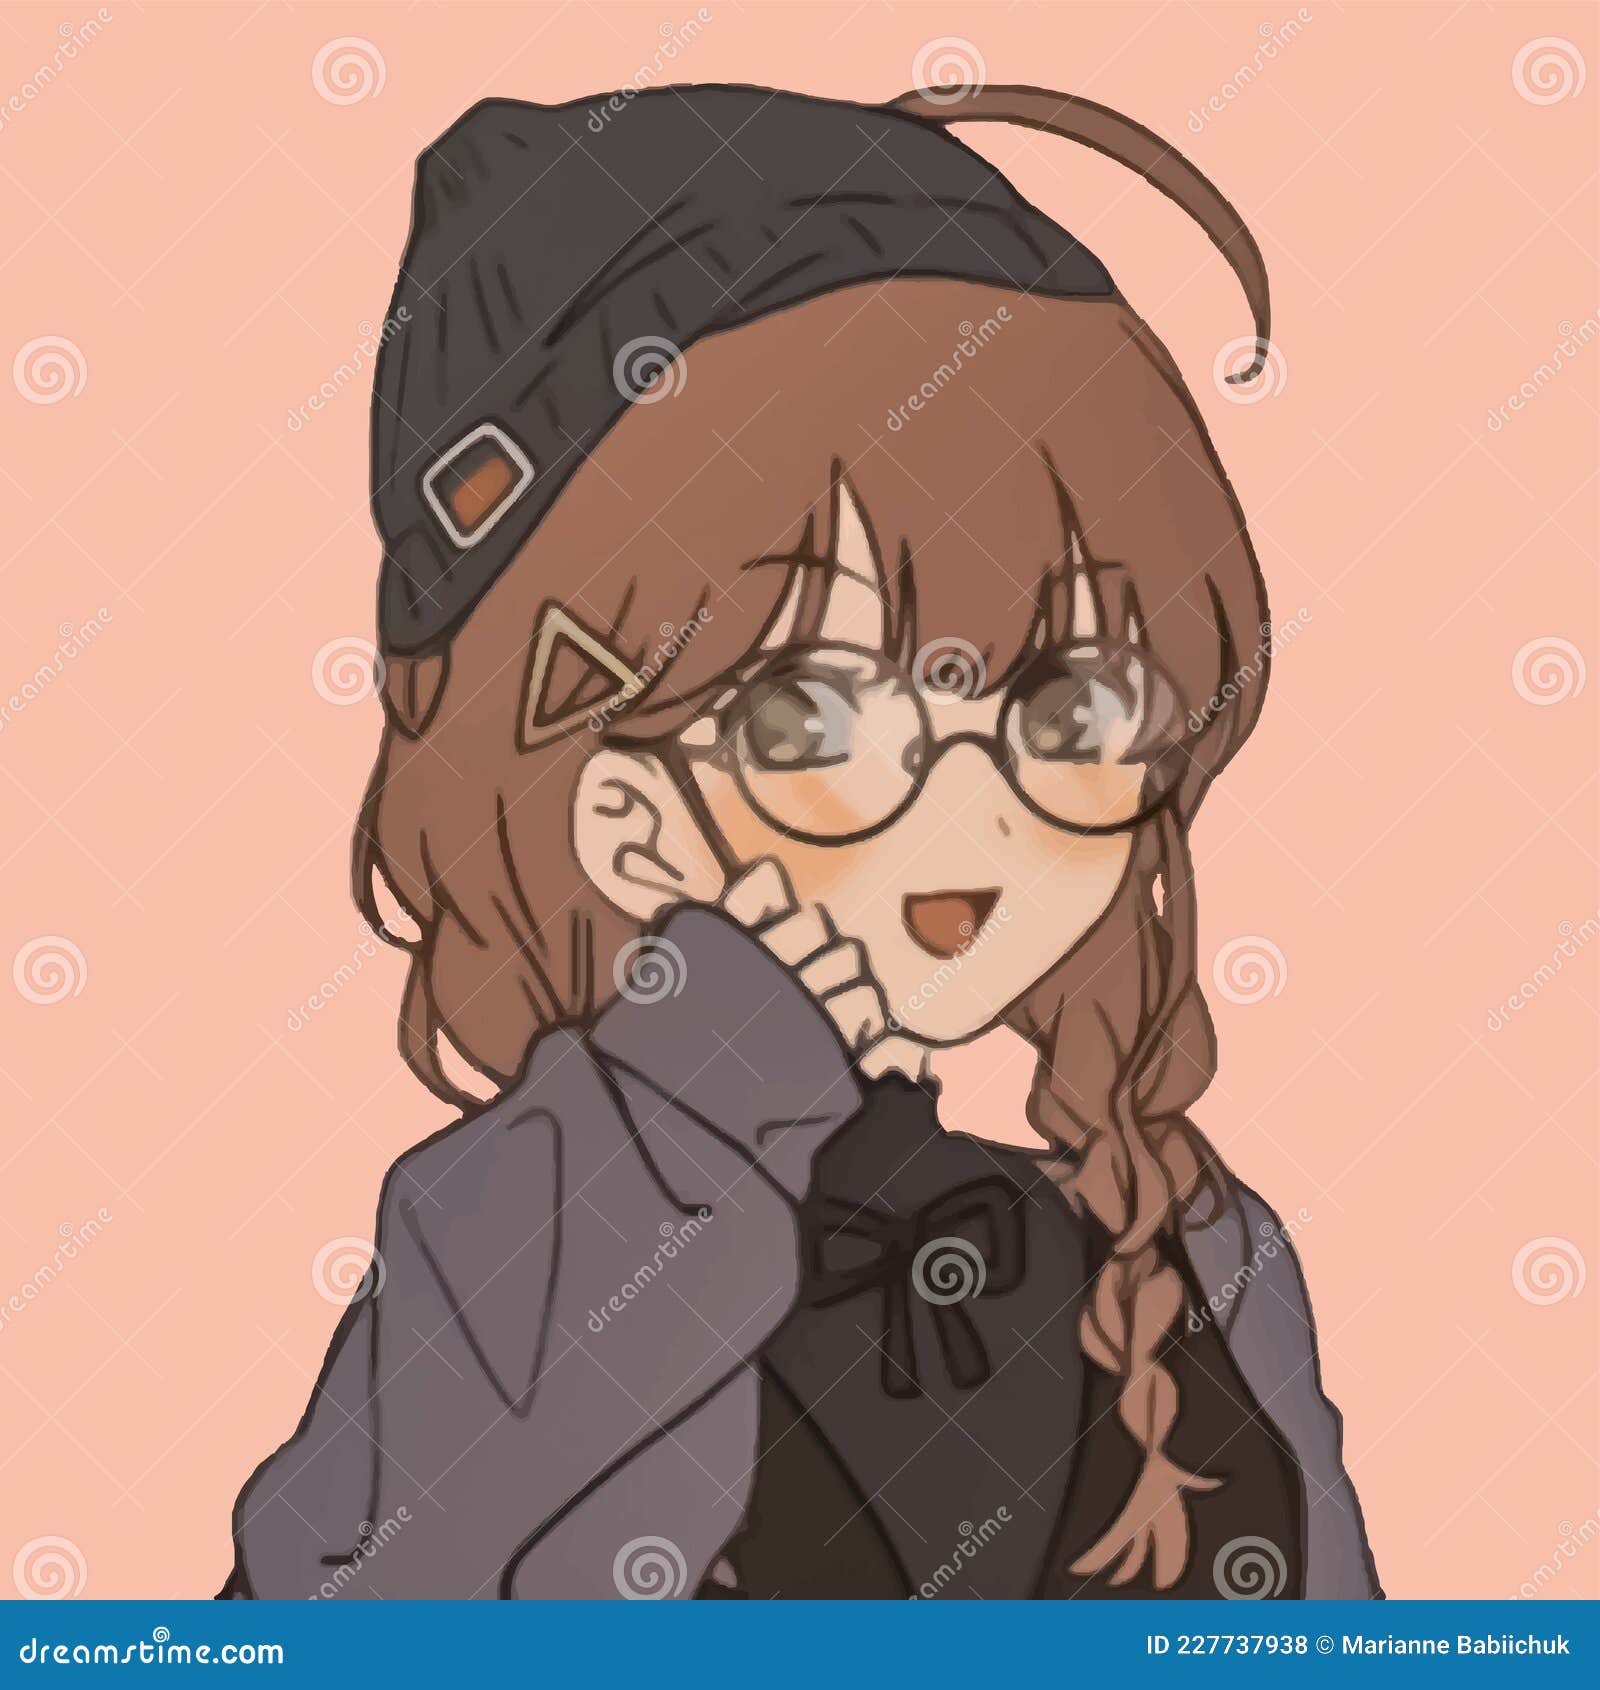 Cute Anime Girl With Glasses And A Hat Stock Vector - Illustration Of  Funny, Japanese: 227737938